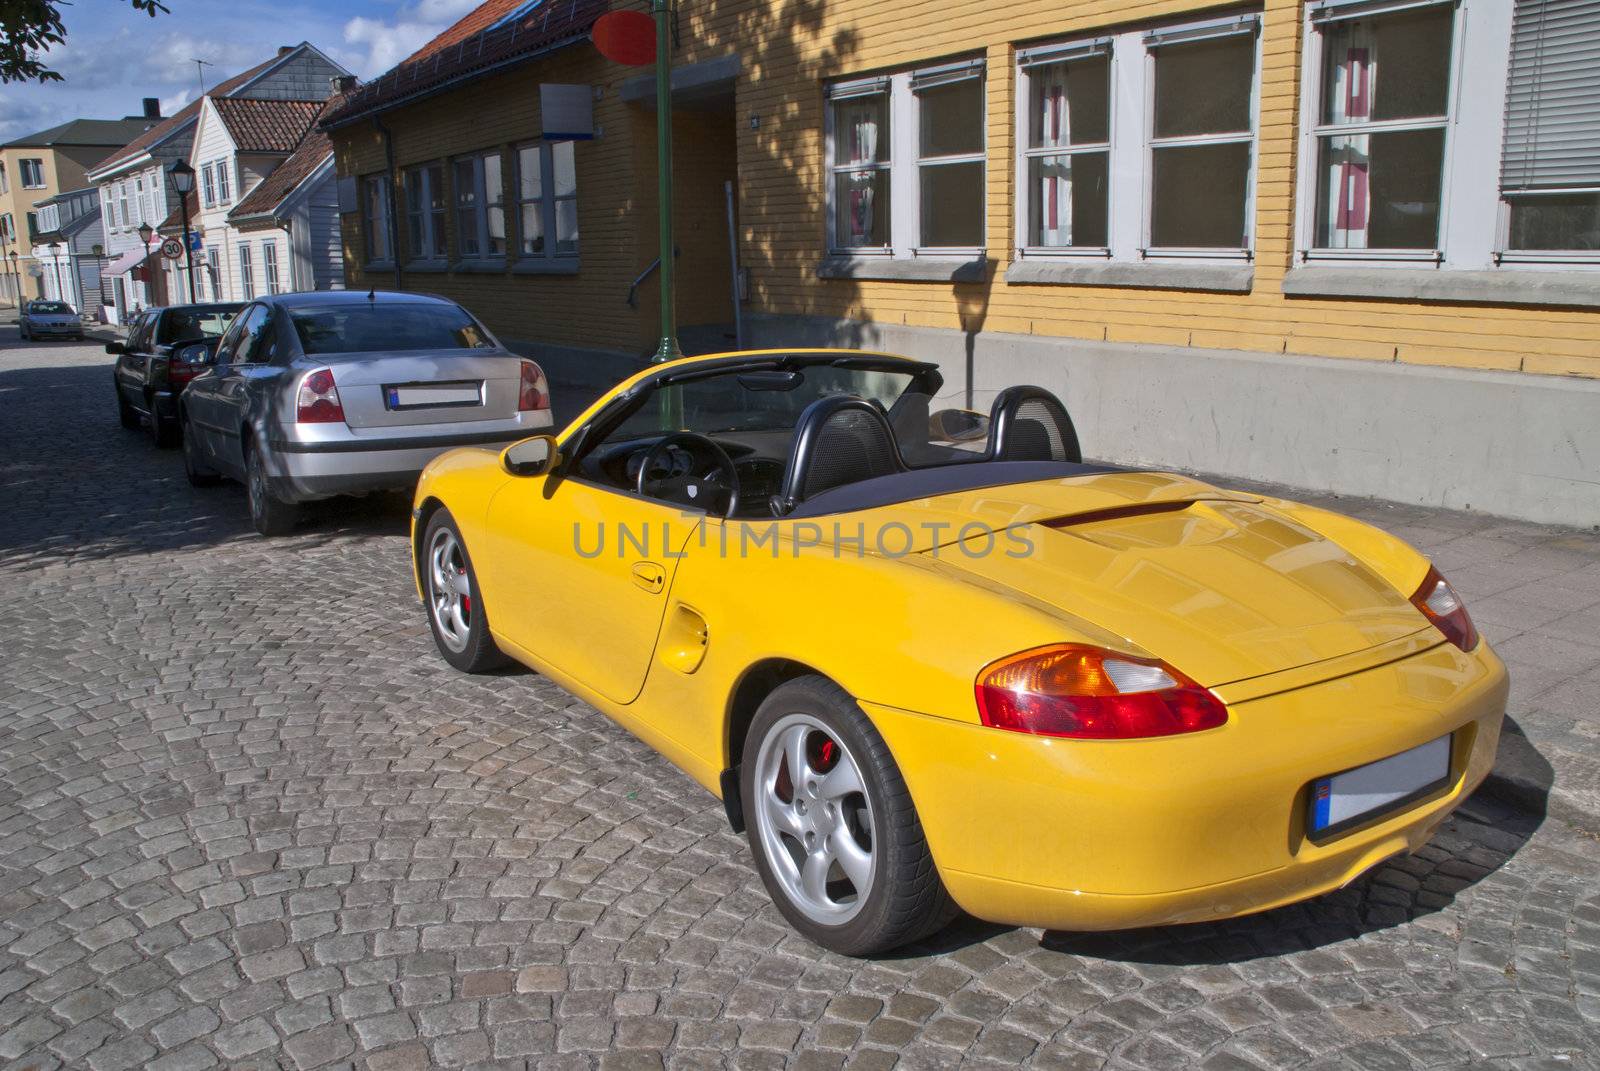 Porsche Boxster is a roadster from the car manufacturer Porsche. Boxster has been produced since late 1996, and is a convertible. It was later also produced a version with a roof, called Cayman, and both are sold side by side. Boxster is Porsche's least expensive model.